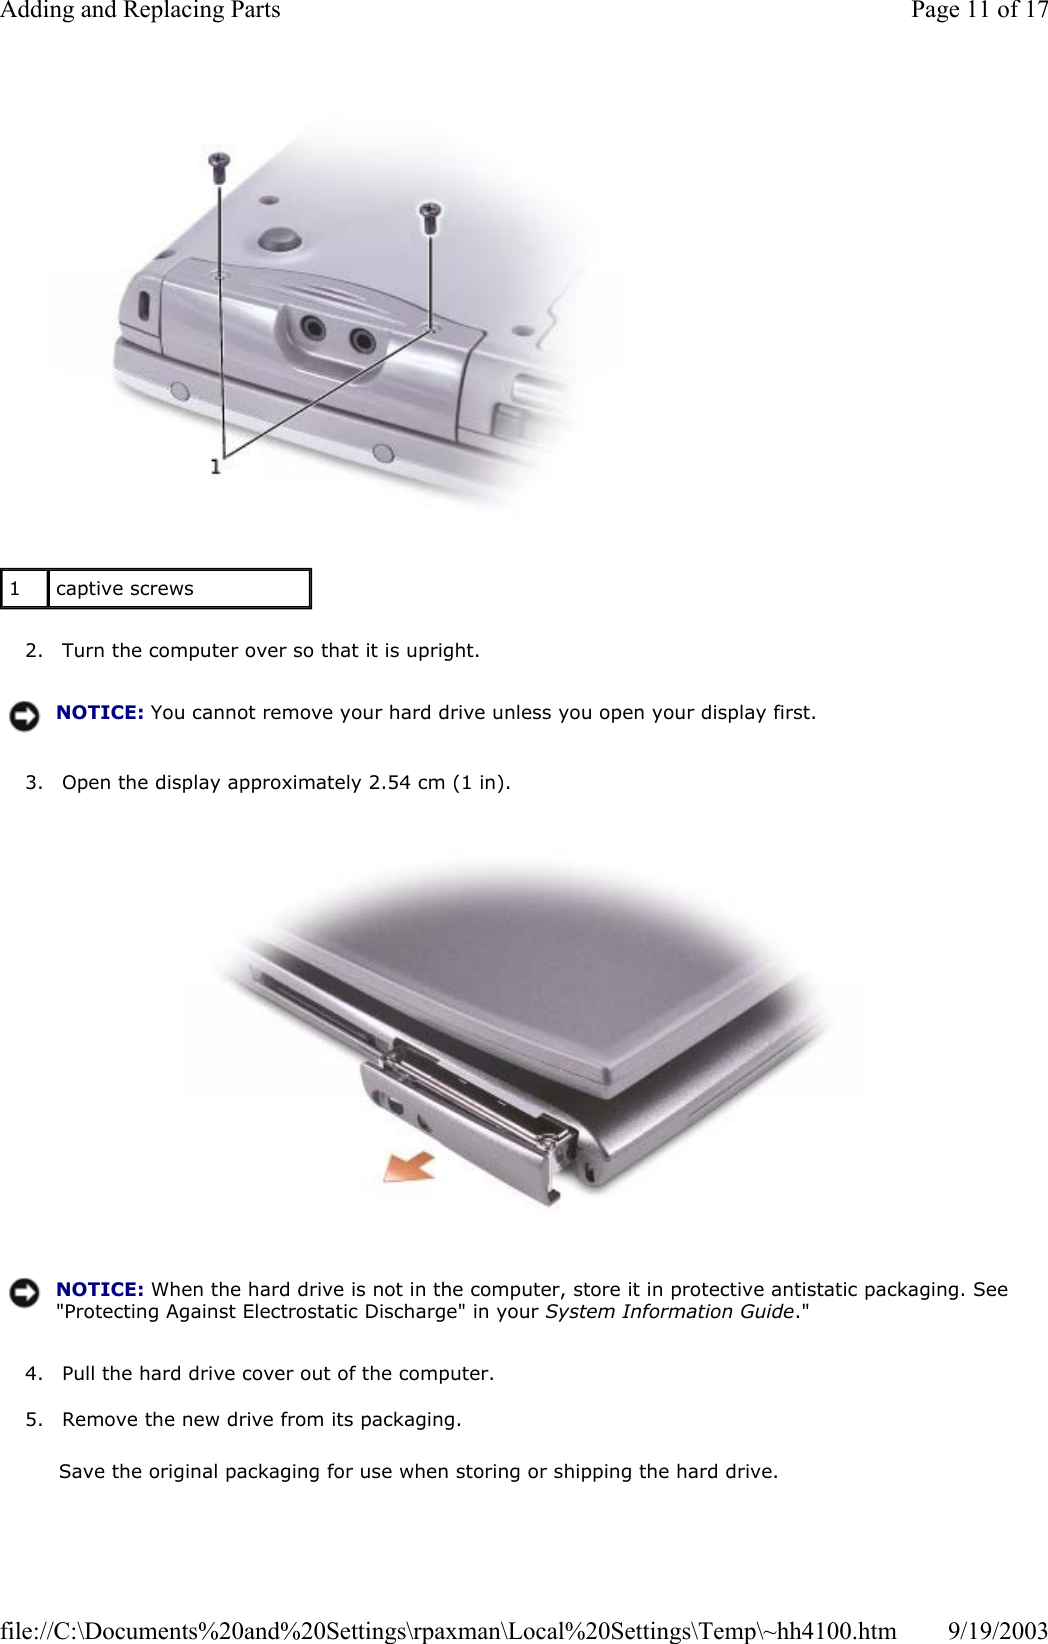   2. Turn the computer over so that it is upright.  3. Open the display approximately 2.54 cm (1 in).    4. Pull the hard drive cover out of the computer.  5. Remove the new drive from its packaging.  Save the original packaging for use when storing or shipping the hard drive. 1  captive screws NOTICE: You cannot remove your hard drive unless you open your display first.NOTICE: When the hard drive is not in the computer, store it in protective antistatic packaging. See &quot;Protecting Against Electrostatic Discharge&quot; in your System Information Guide.&quot;Page 11 of 17Adding and Replacing Parts9/19/2003file://C:\Documents%20and%20Settings\rpaxman\Local%20Settings\Temp\~hh4100.htm